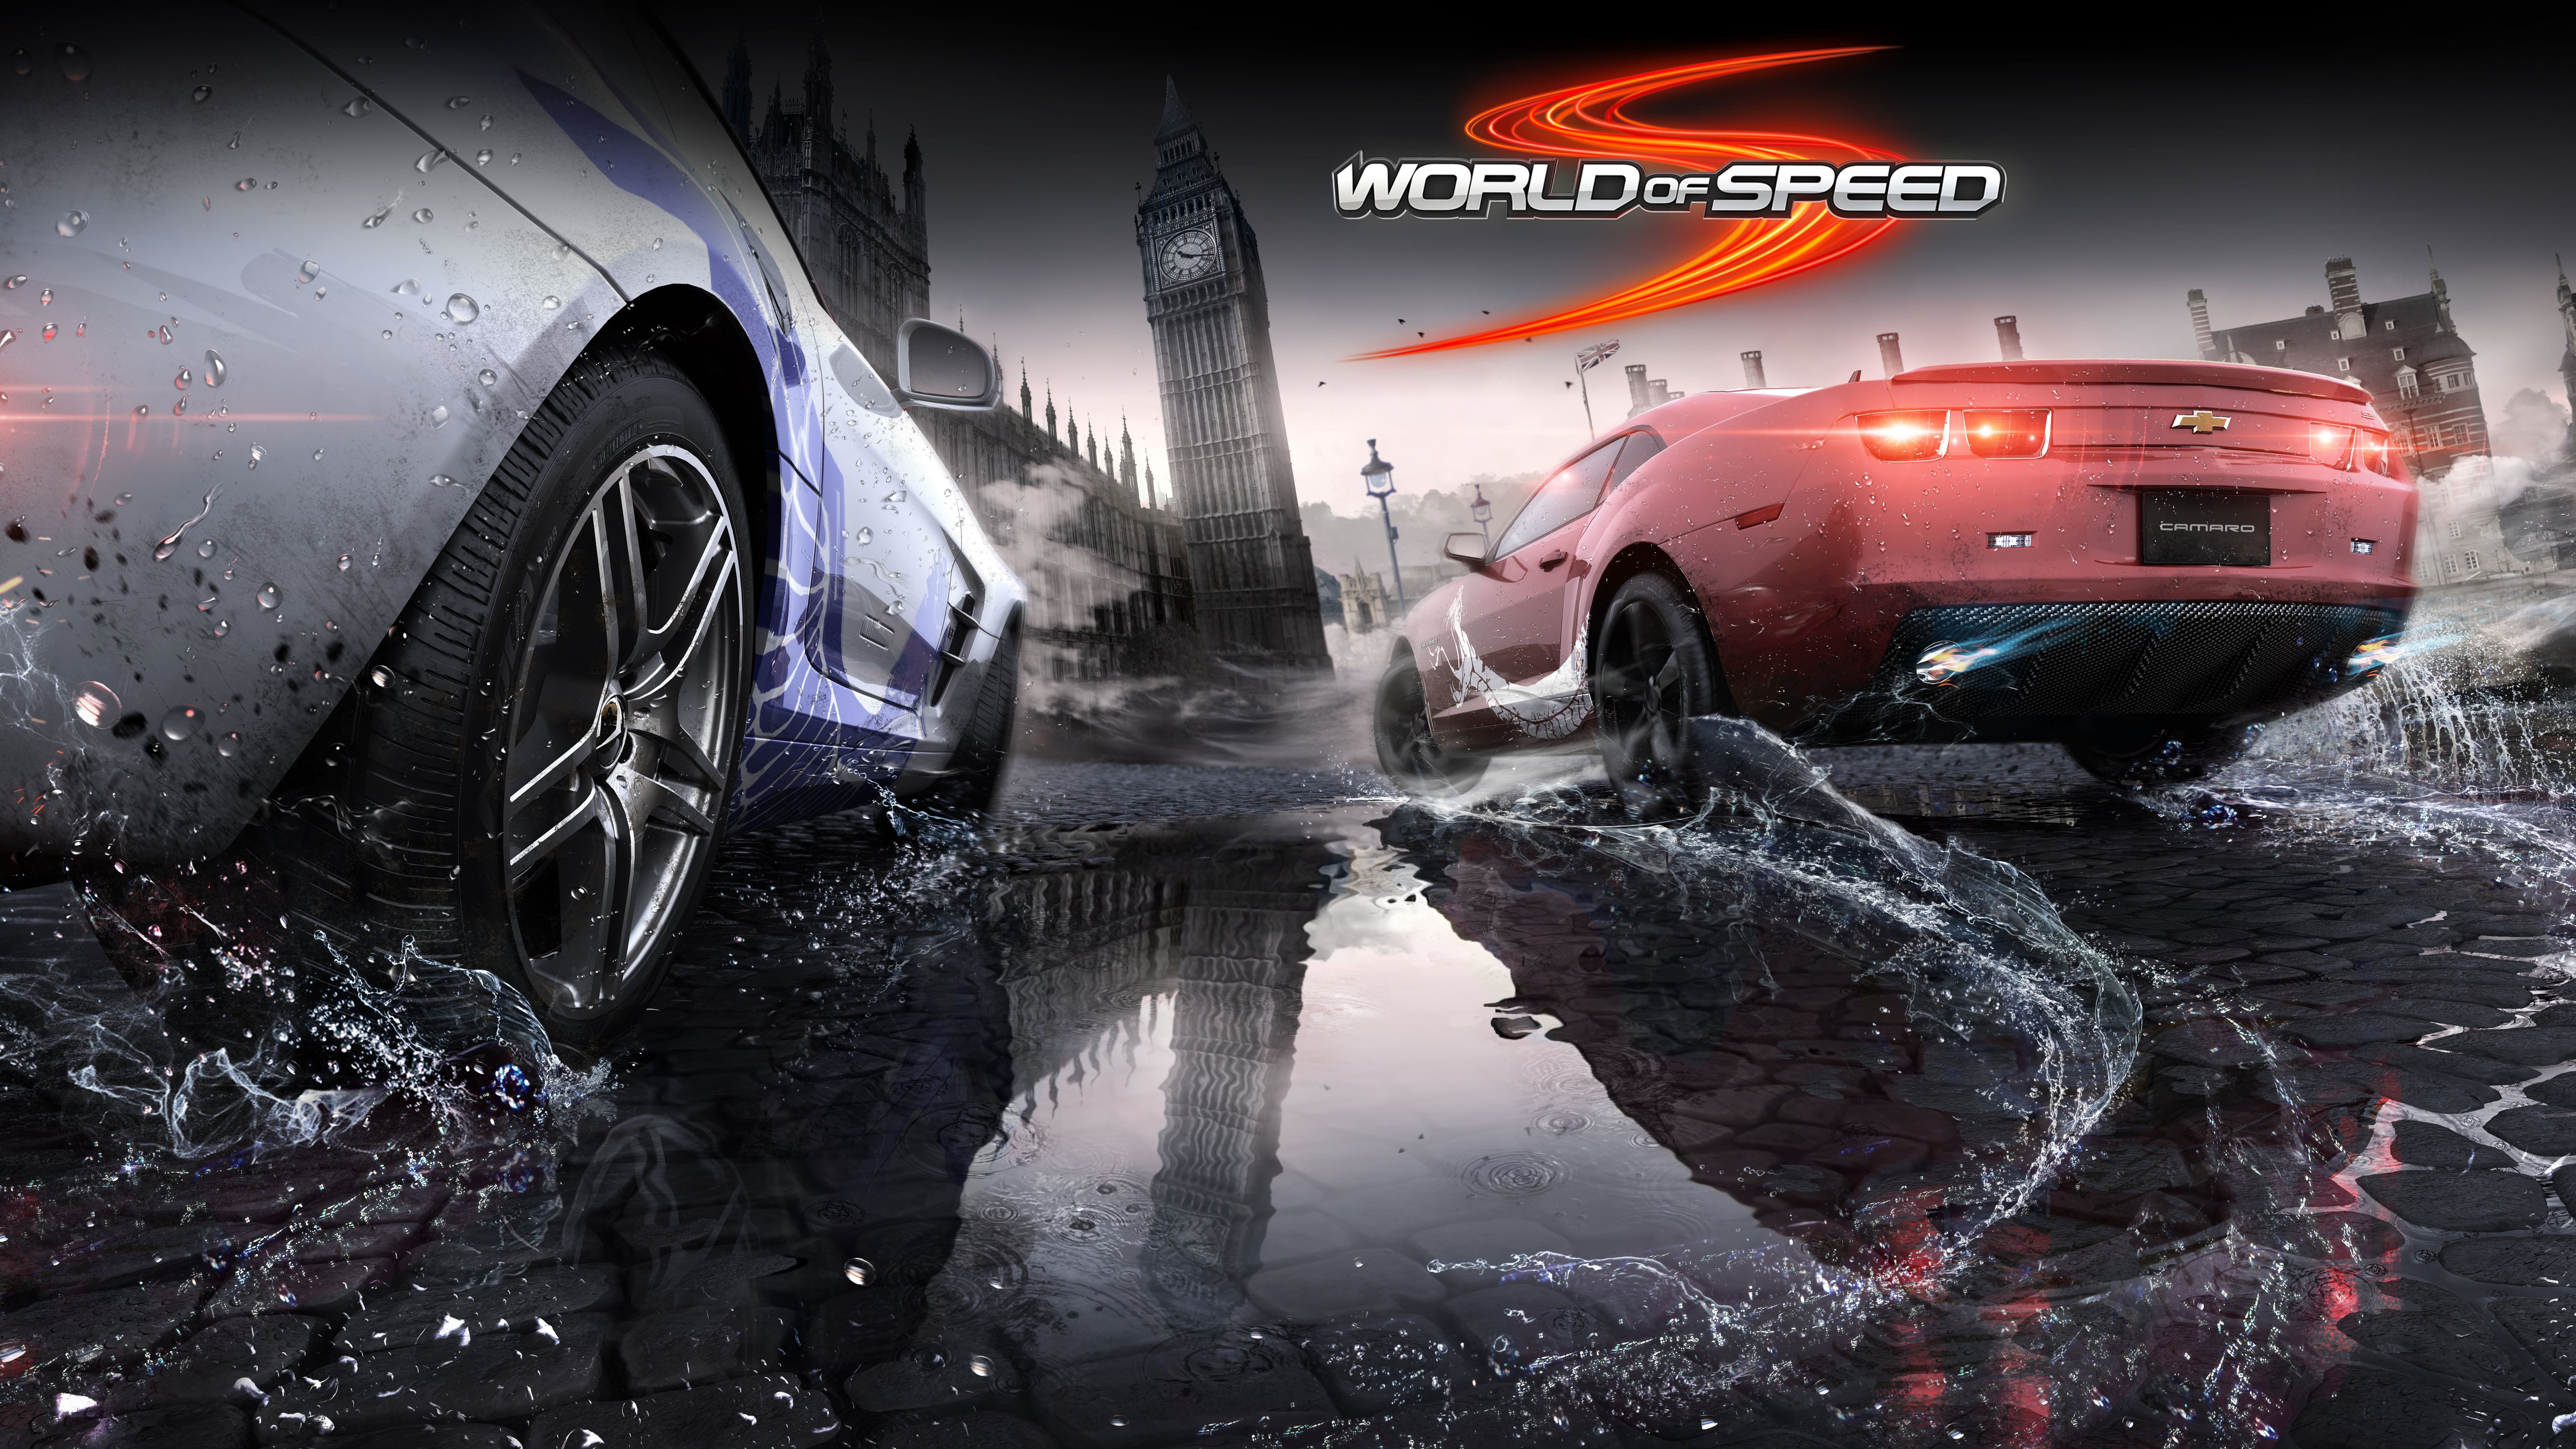 World of Speed HD Wallpapers. 4K Wallpapers